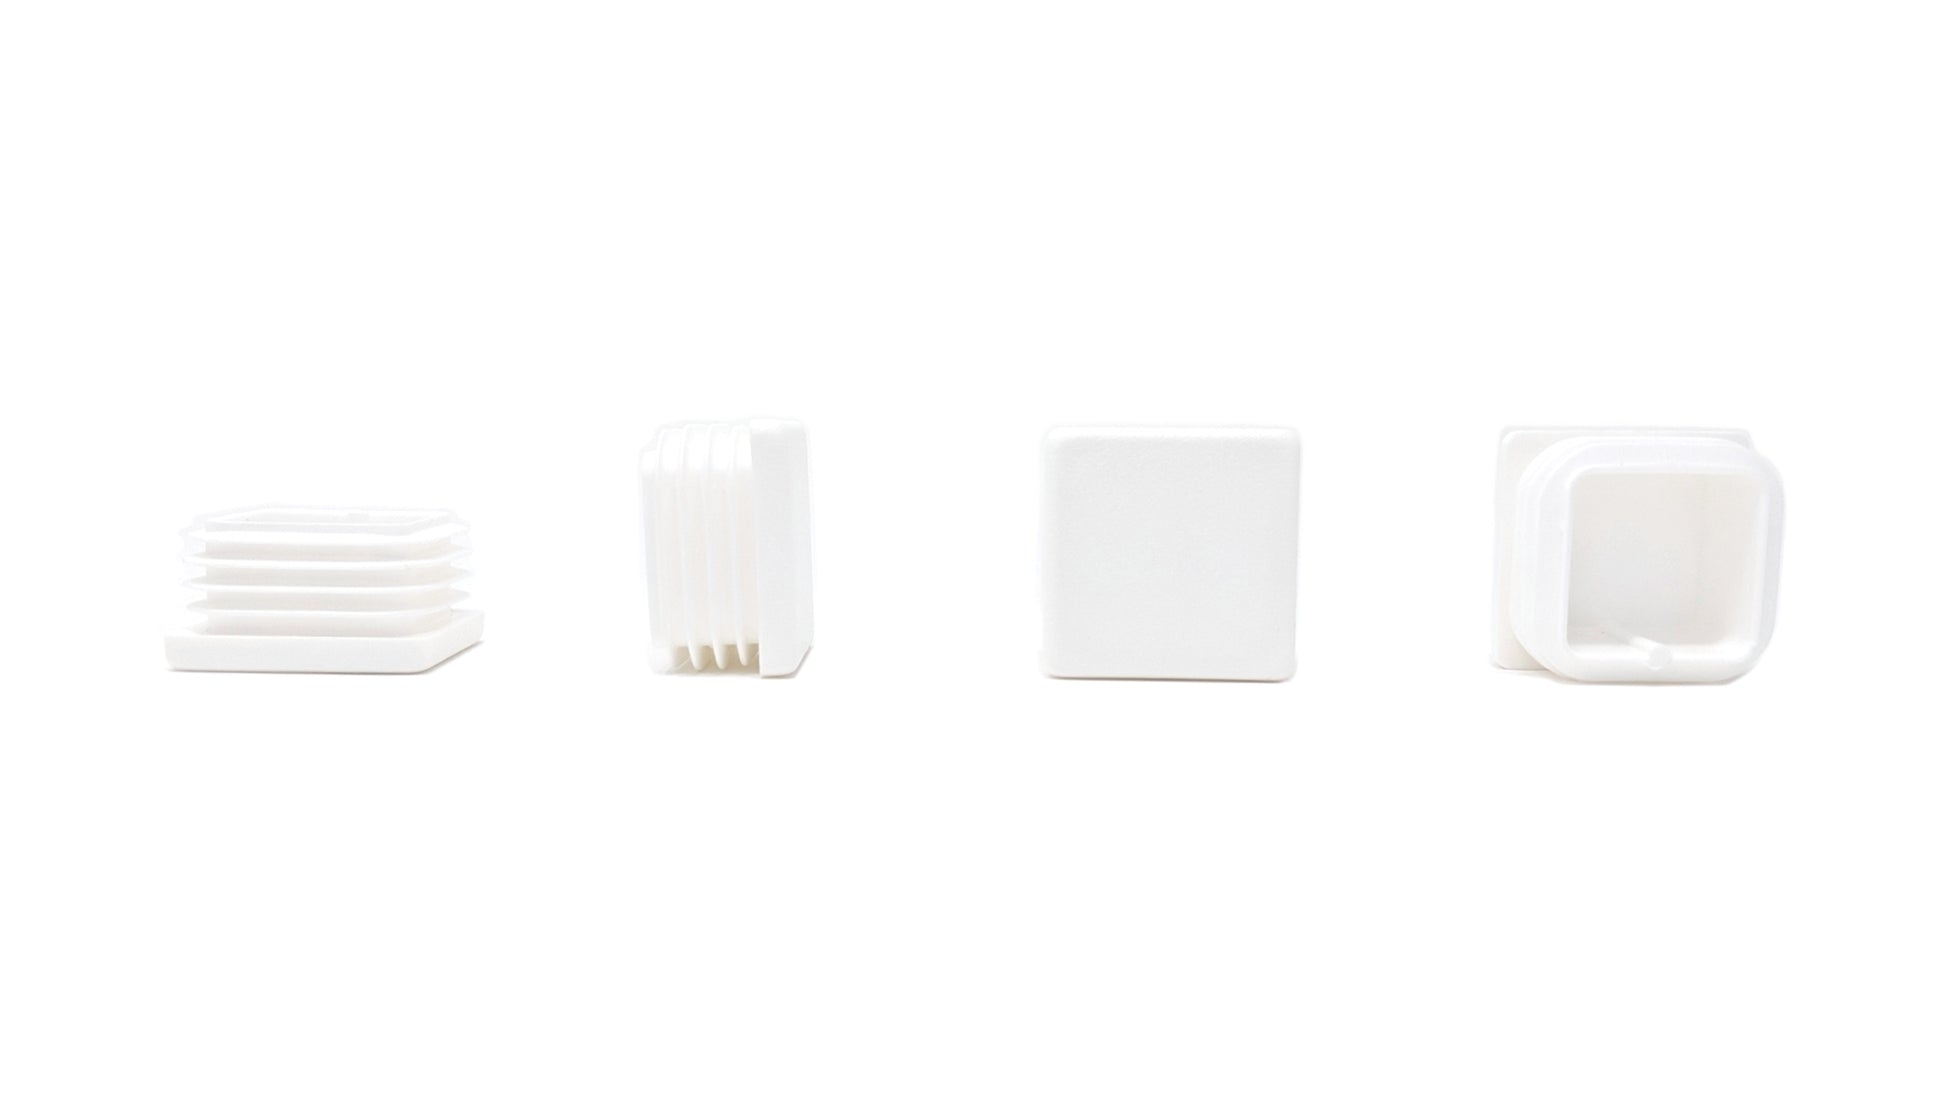 Square Tube Inserts 35mm x 35mm White | Made in Germany | Keay Vital Parts - Keay Vital Parts